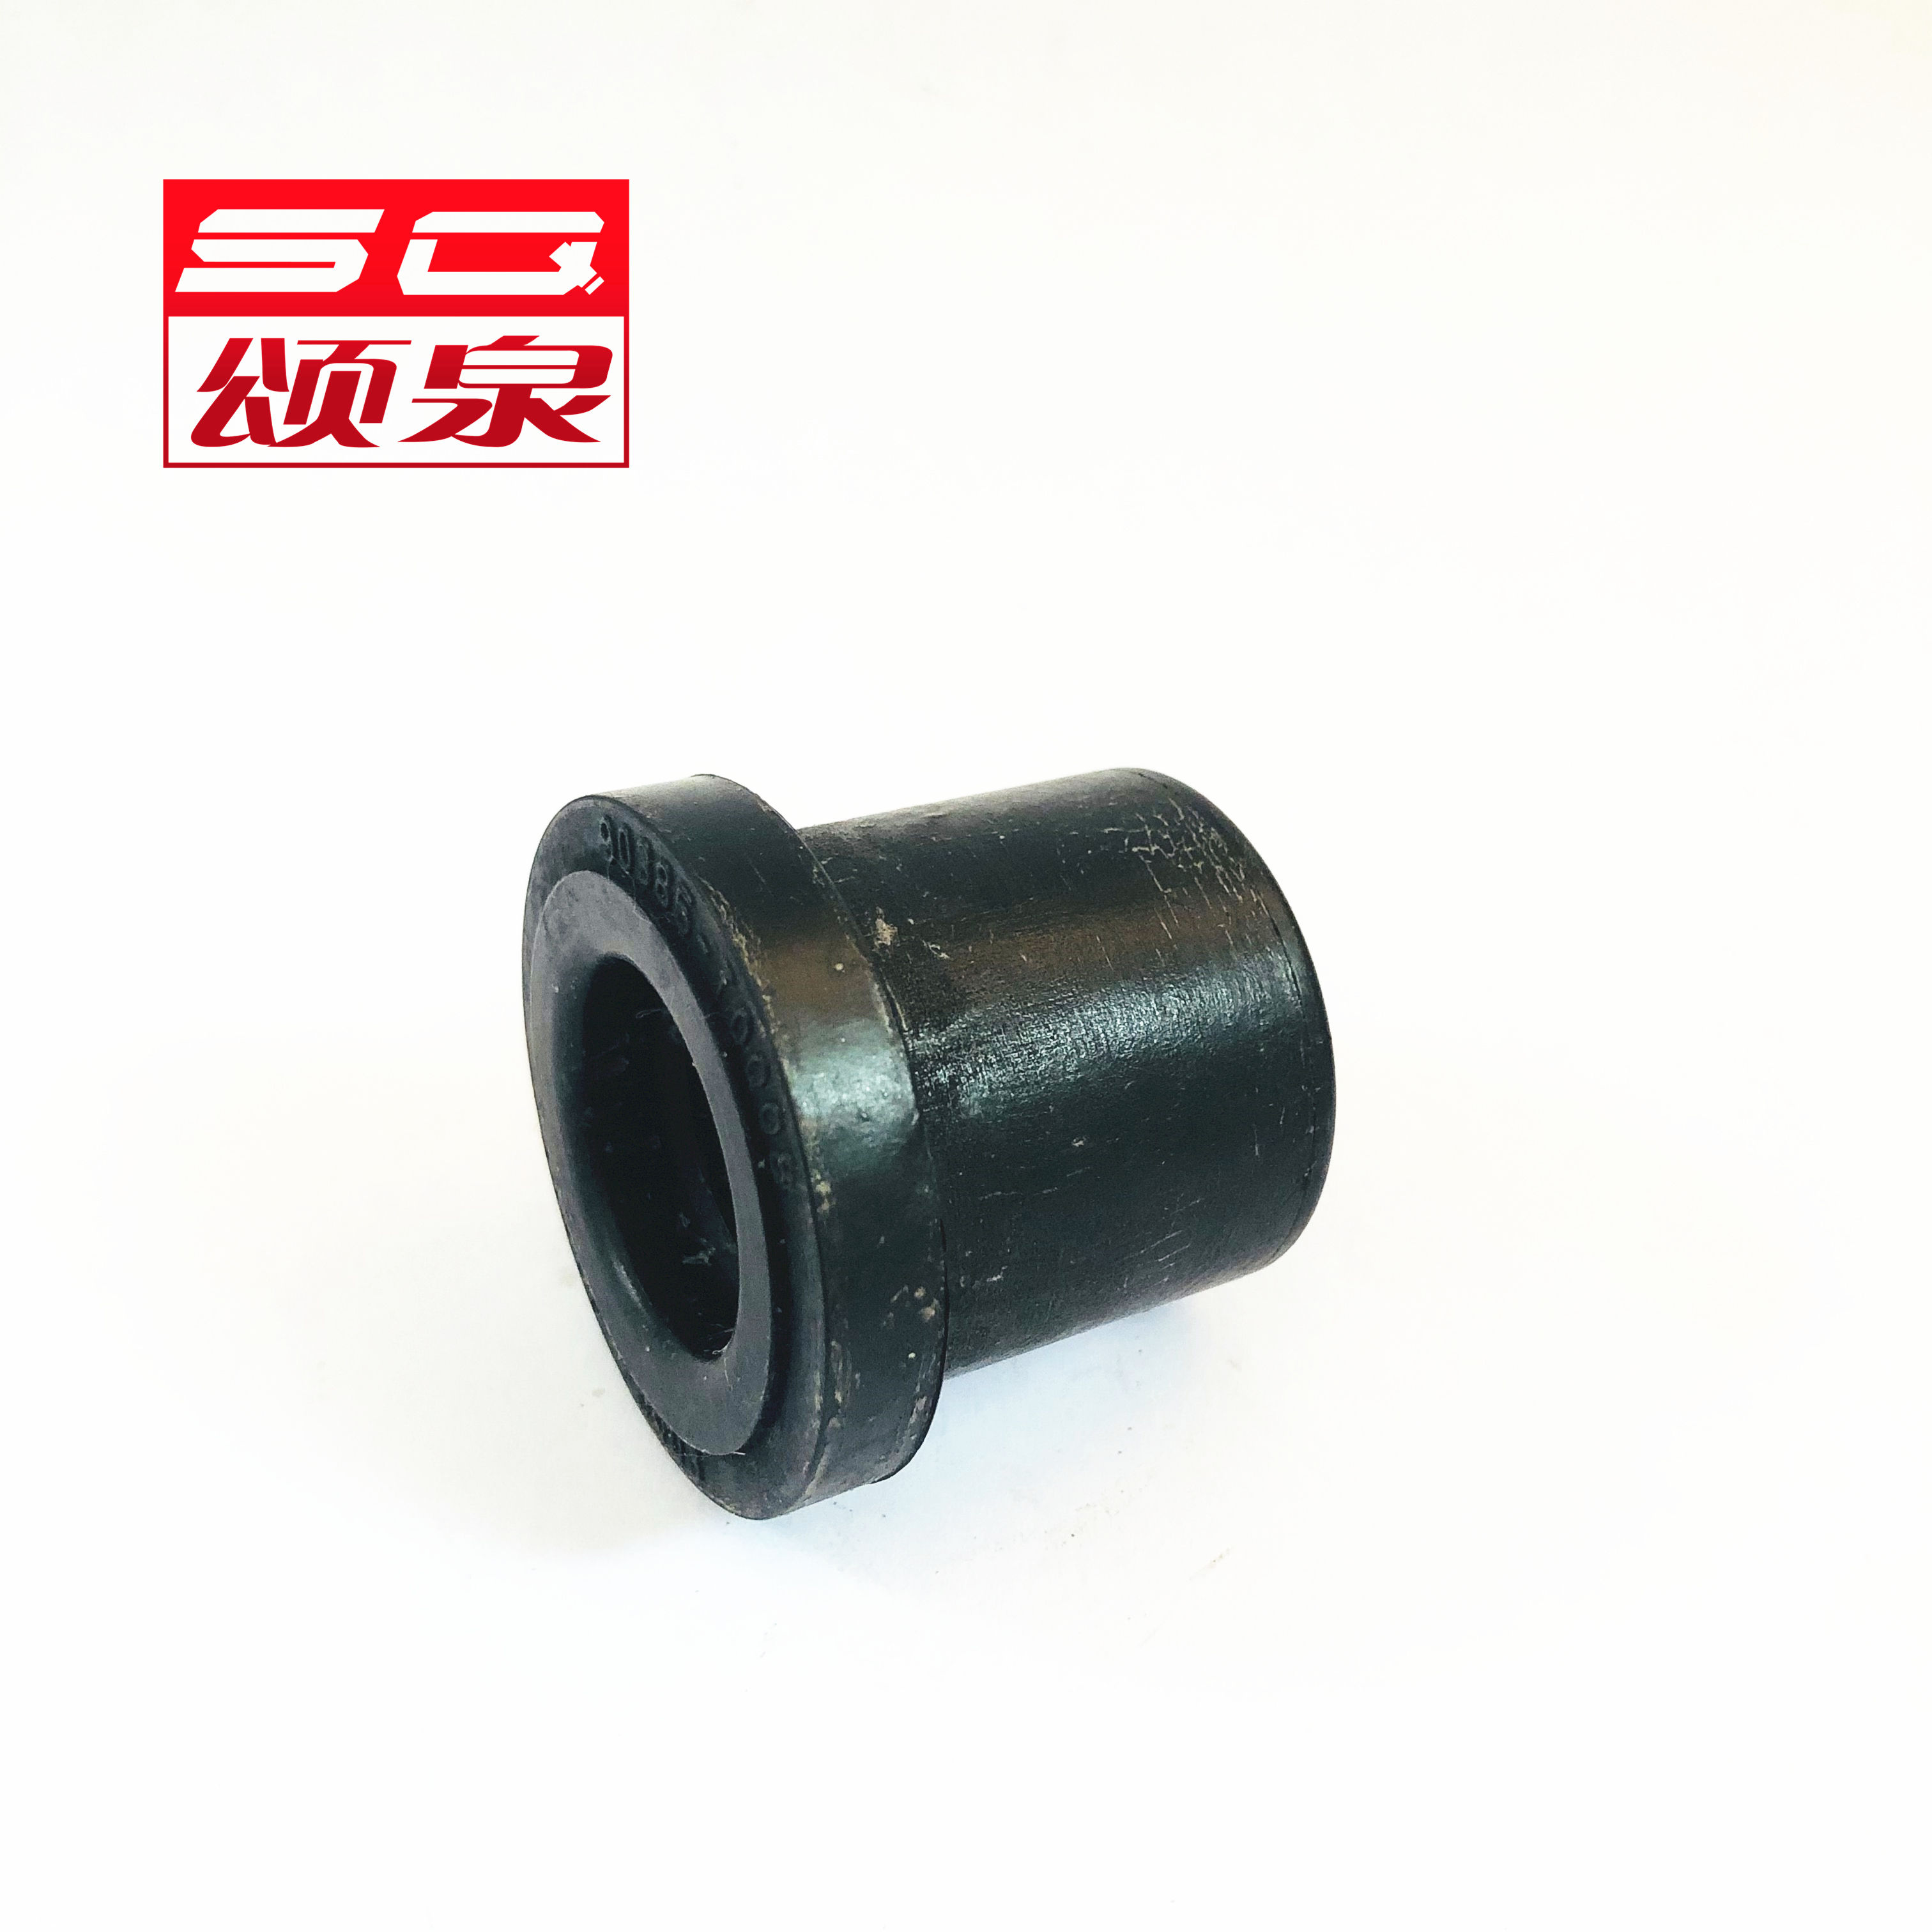 90385-T0003 90385-T0008 90385-T0016 Stabilizer Bushing for Toyota Hilux Pickup High Quality Rubber Bushing